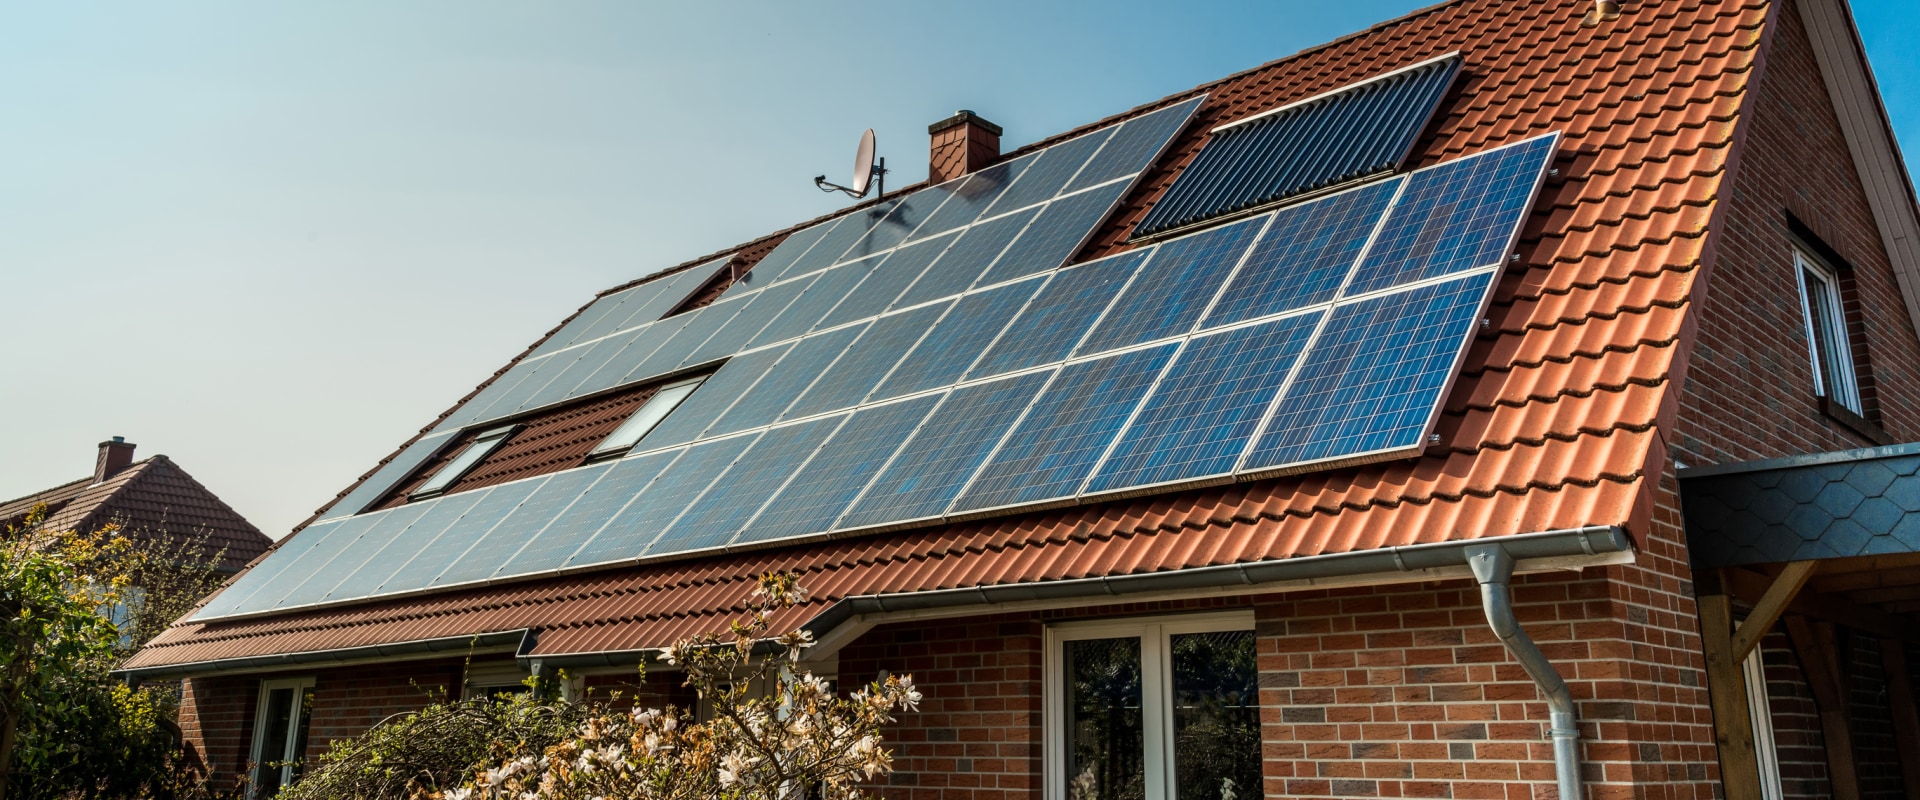 Can solar energy be used in homes?